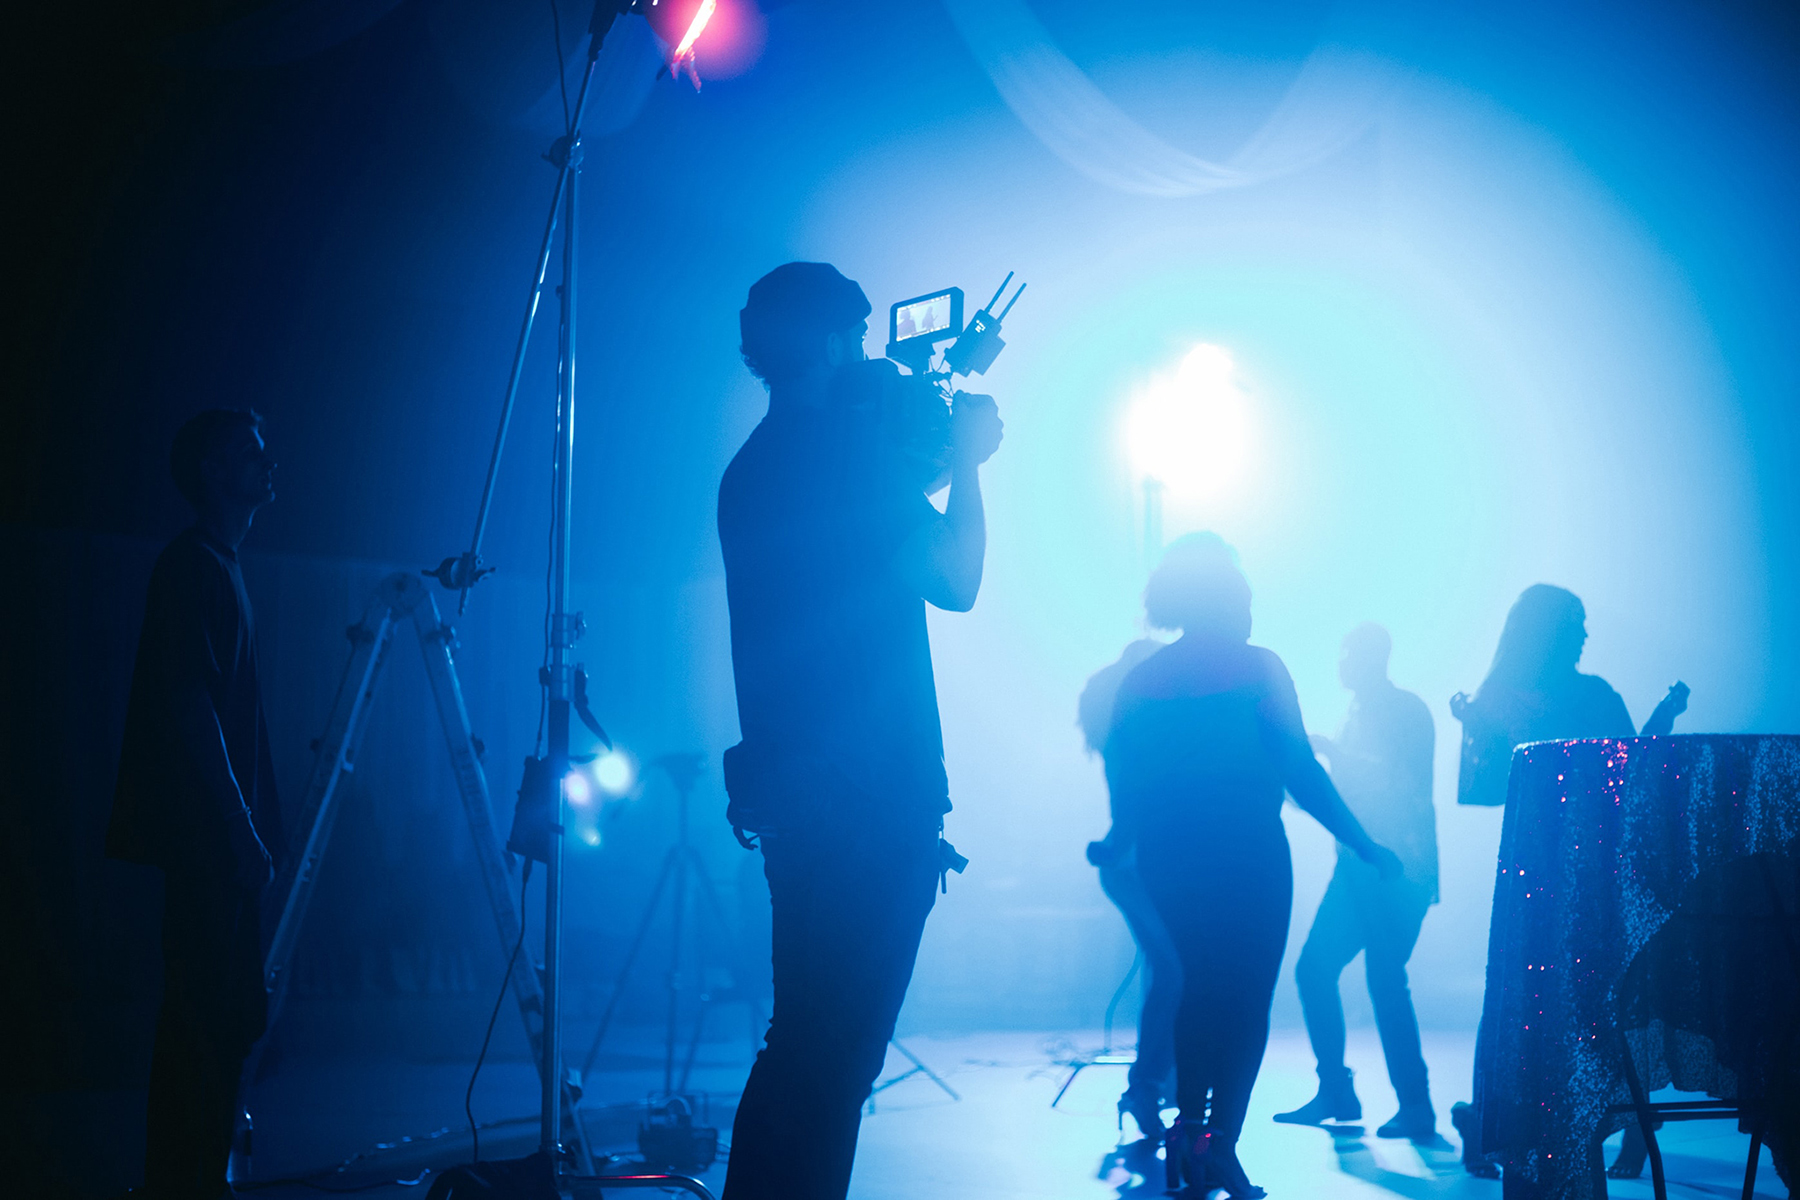 film crew silhouetted against a blue light